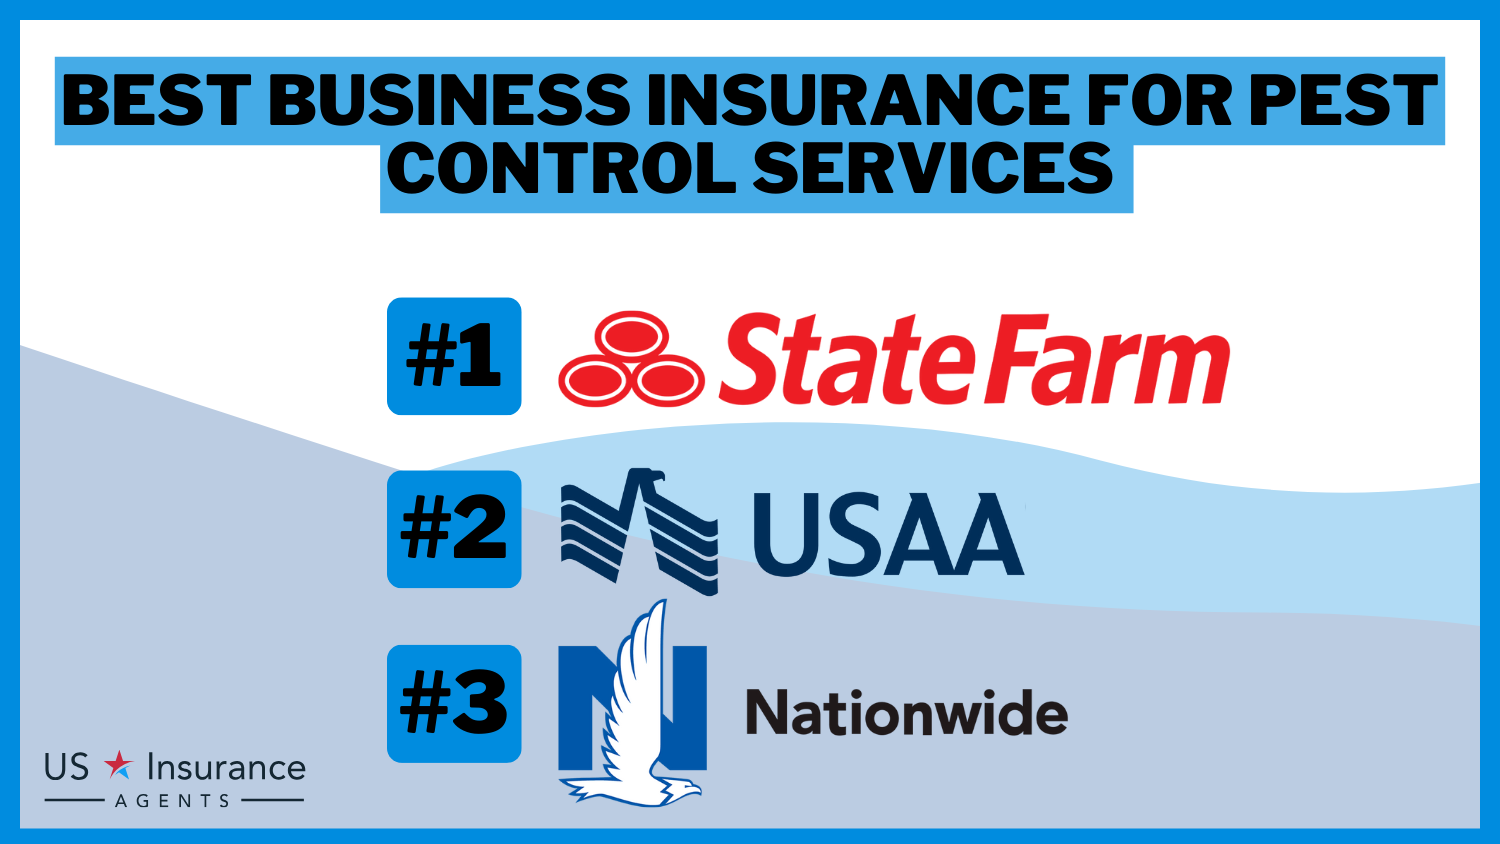 3 Best Business Insurance for Pest Control Services: State Farm, USAA, and Nationwide.